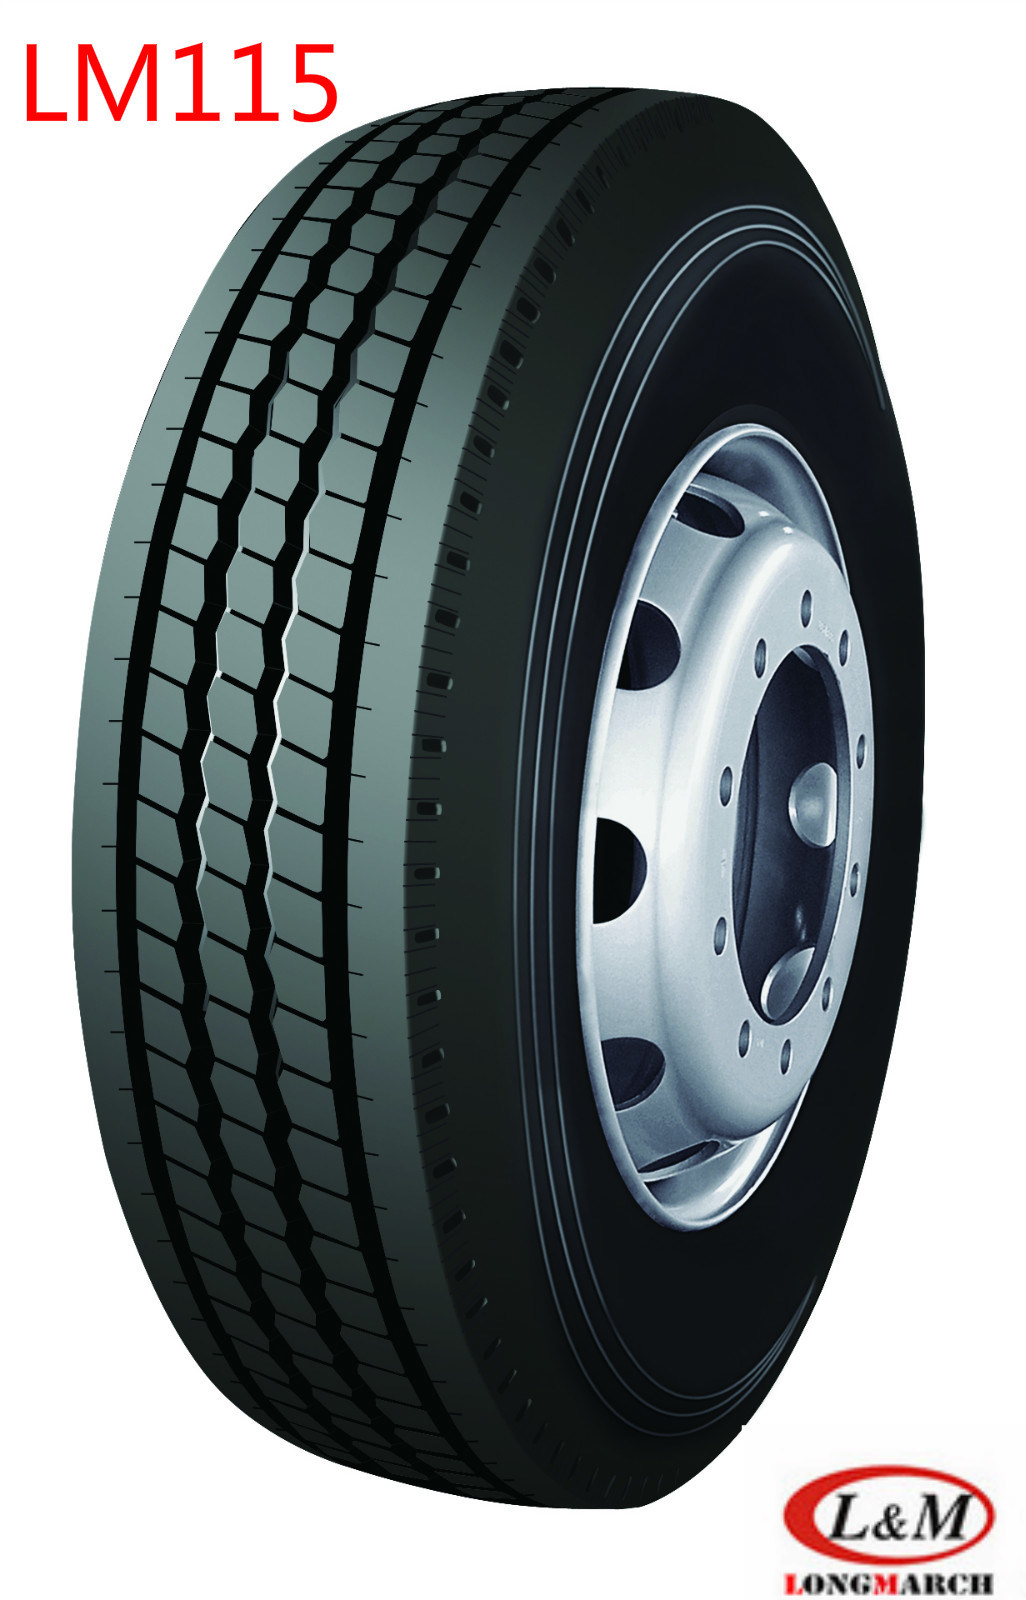 LONGMARCH Drive/Steer/Trailer Tyre for All Positions (115)